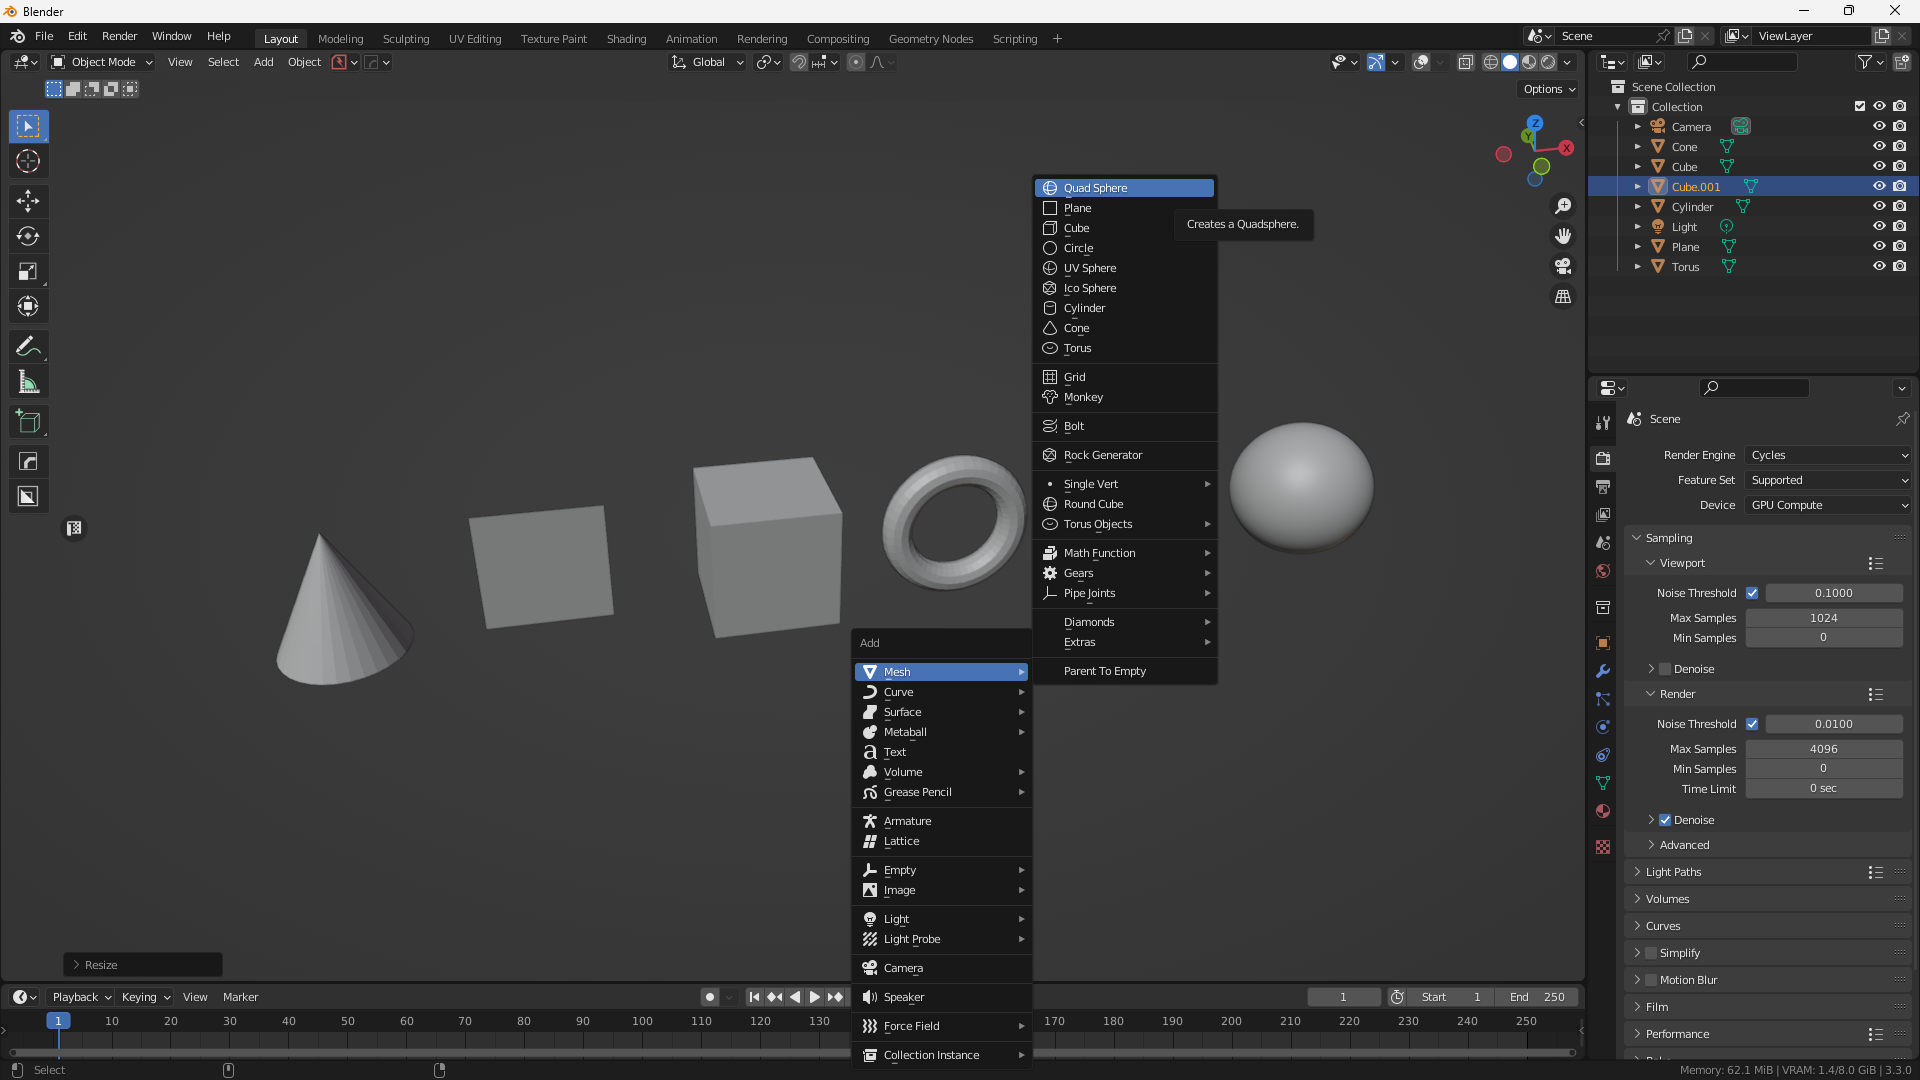 Blender 3D viewport featuring common primitive shapes added to the scene for 3D modeling